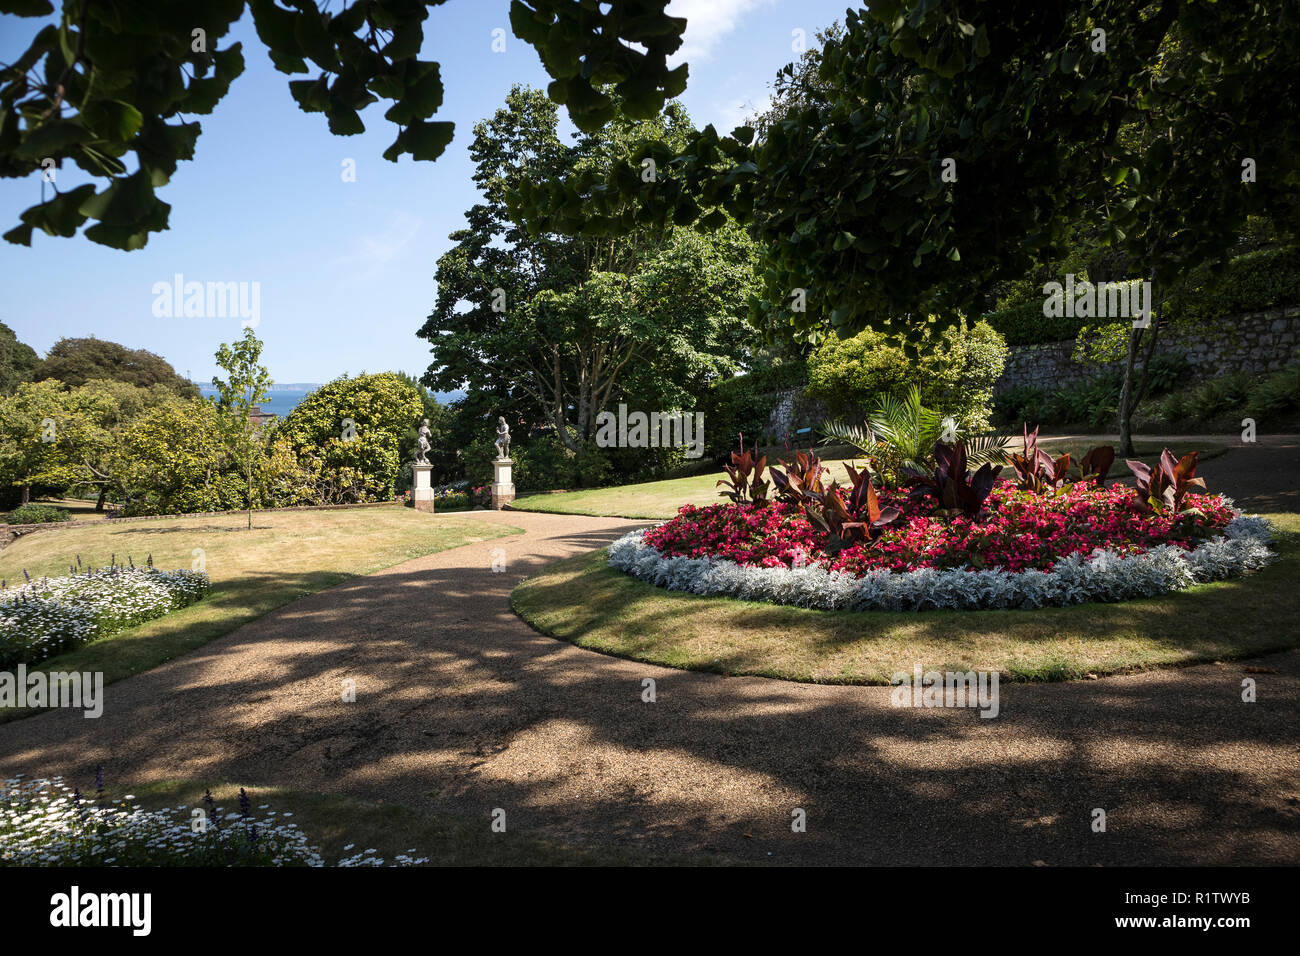 Candie Gardens, St Peter Port Guernsey, Isole del Canale, REGNO UNITO Foto Stock